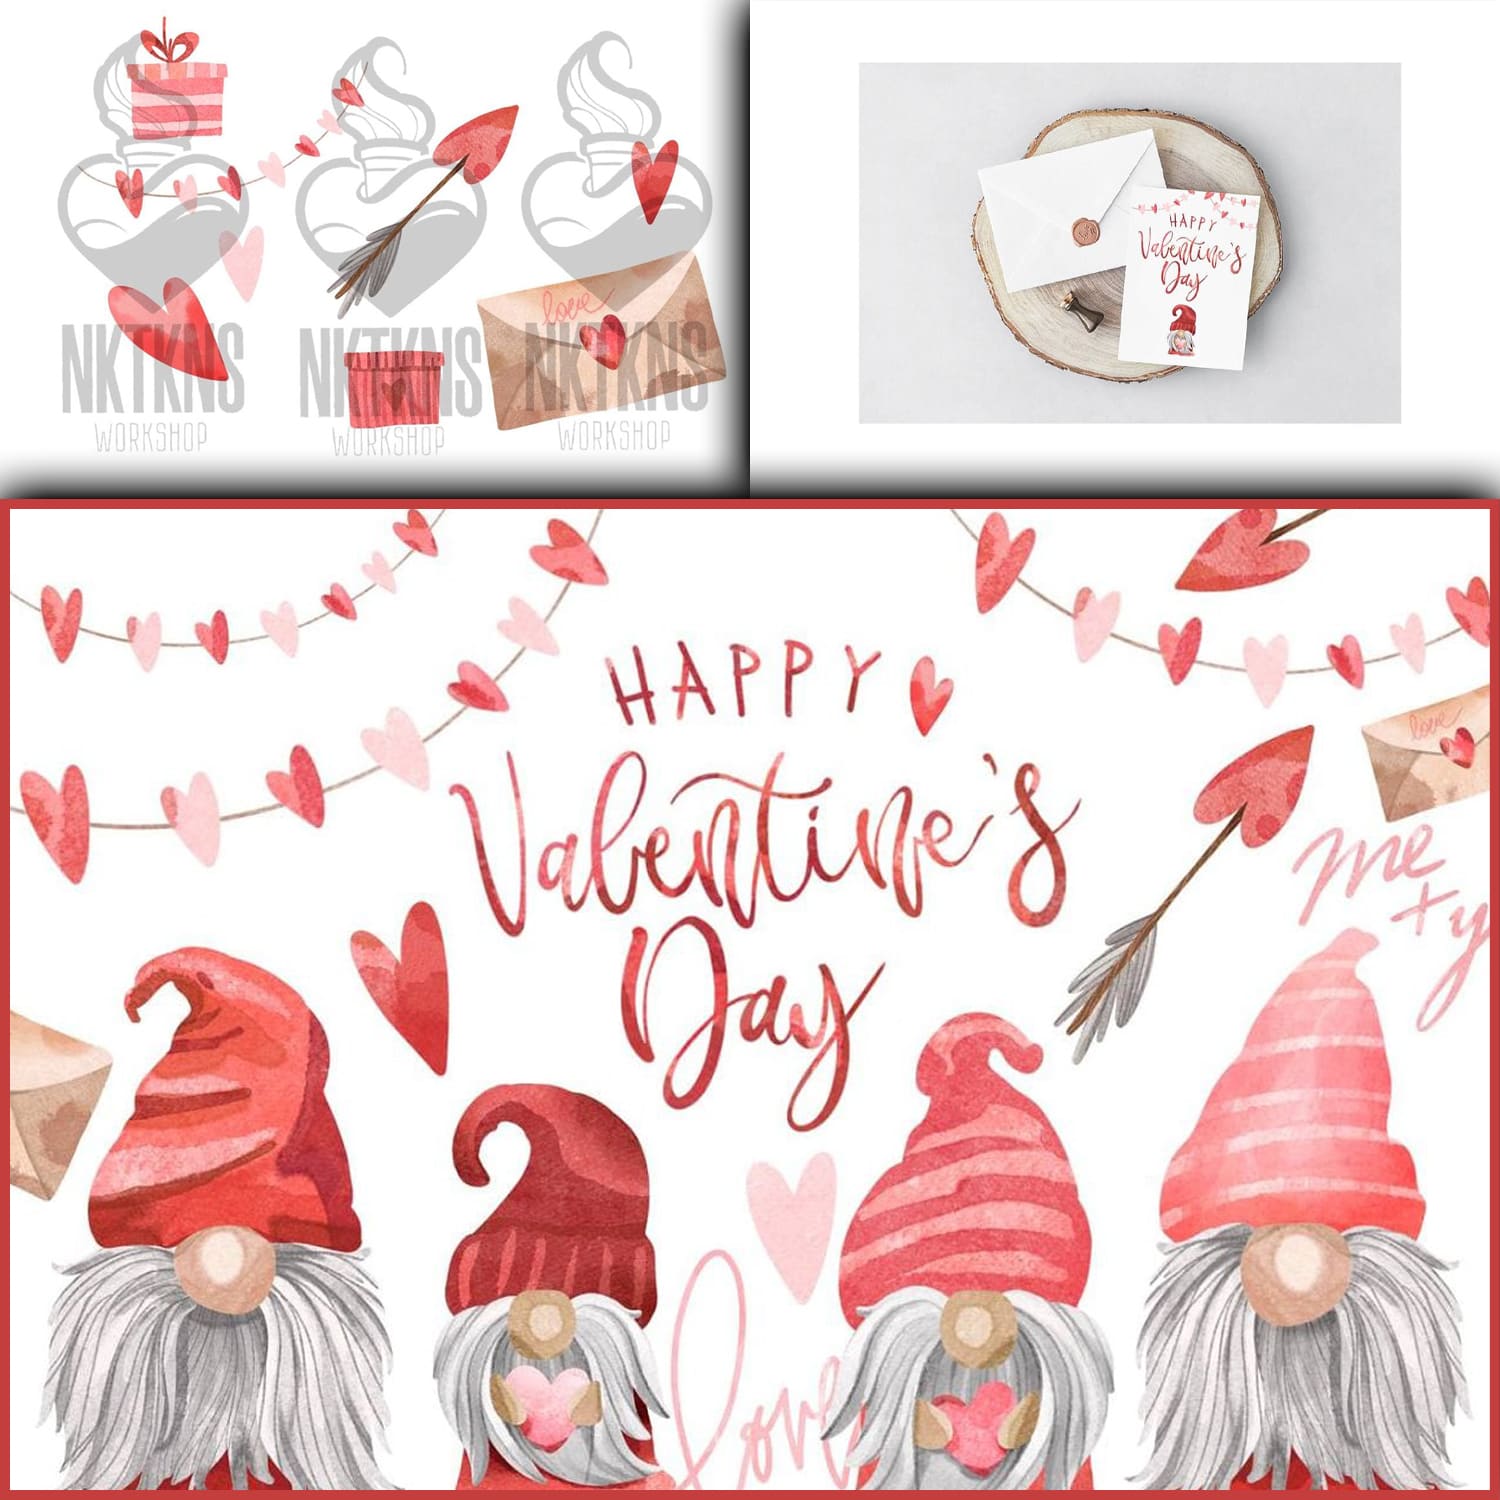 Examples of using watercolor hearts and gnomes on postcards.